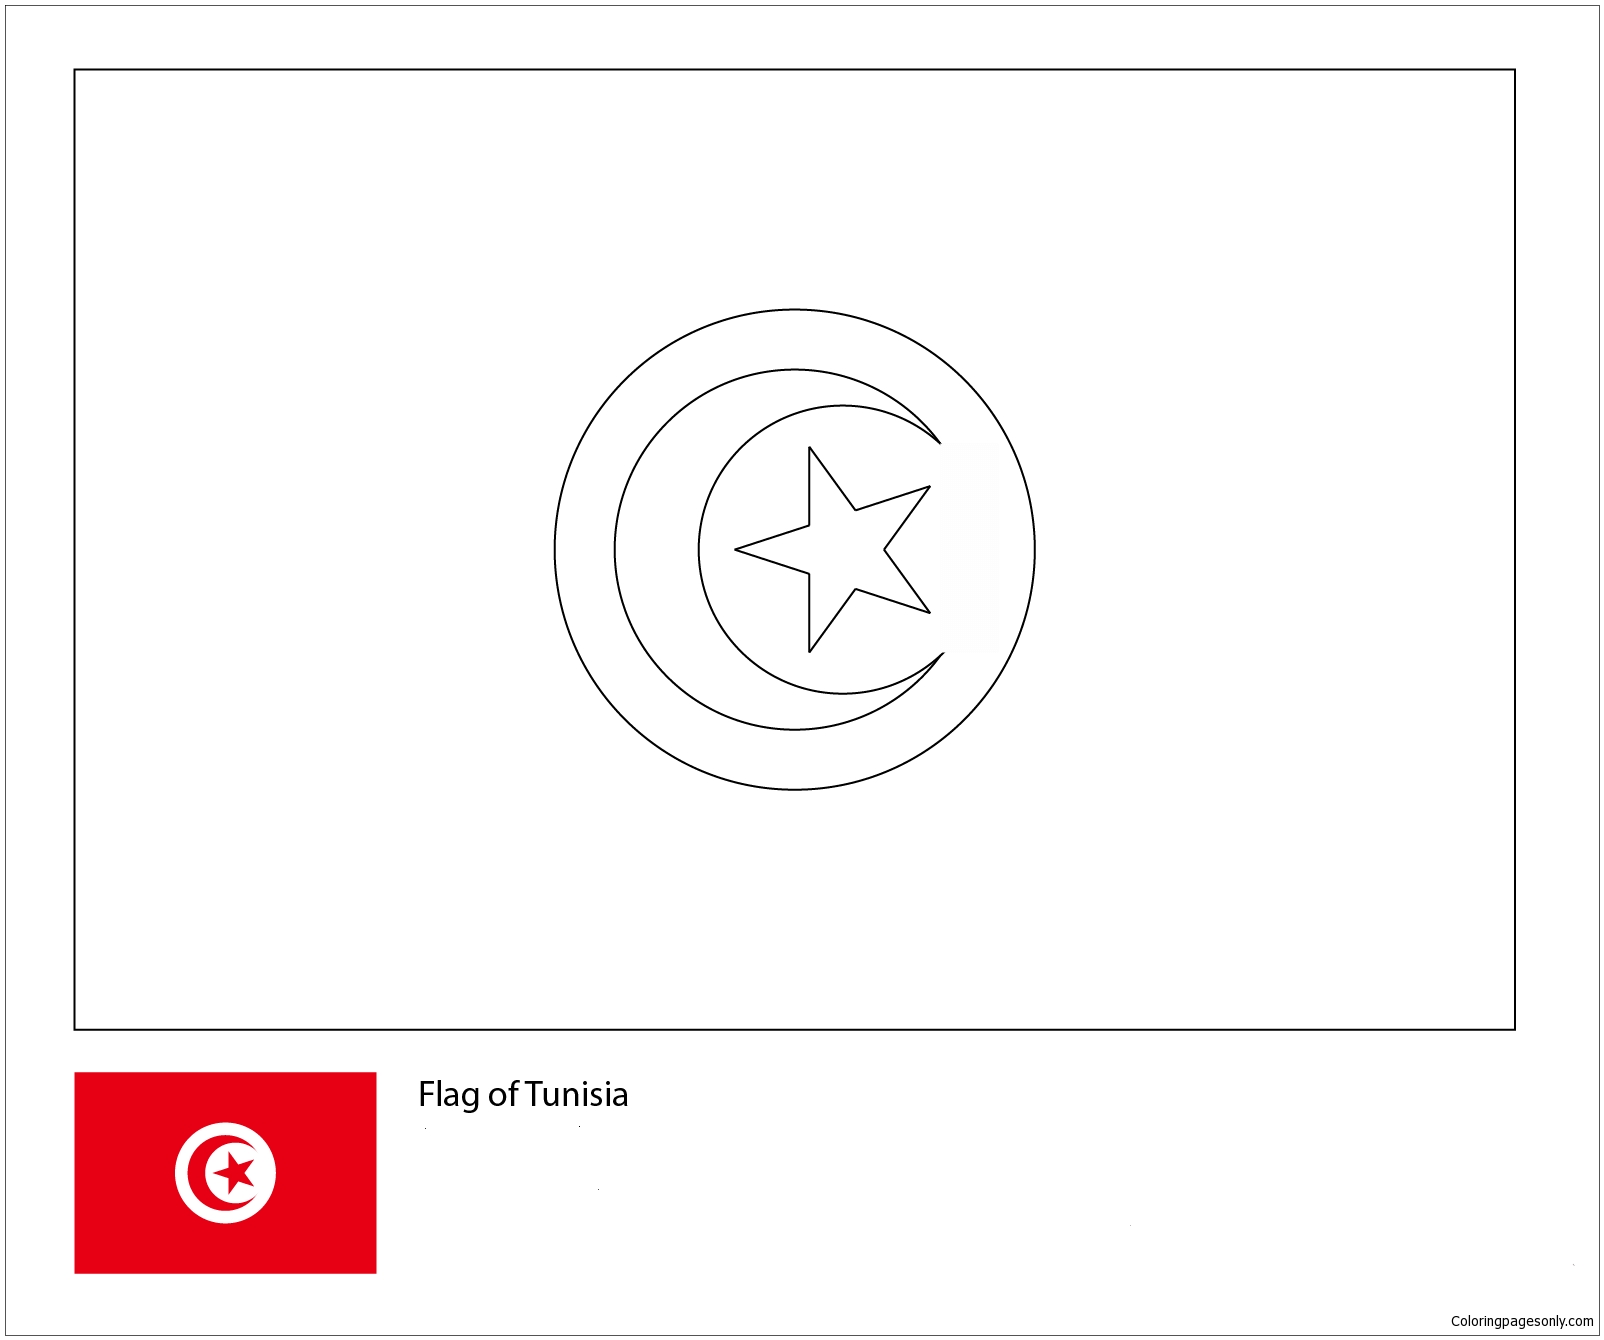 Flag of Tunisia-World Cup 2018 from World Cup 2018 Flags